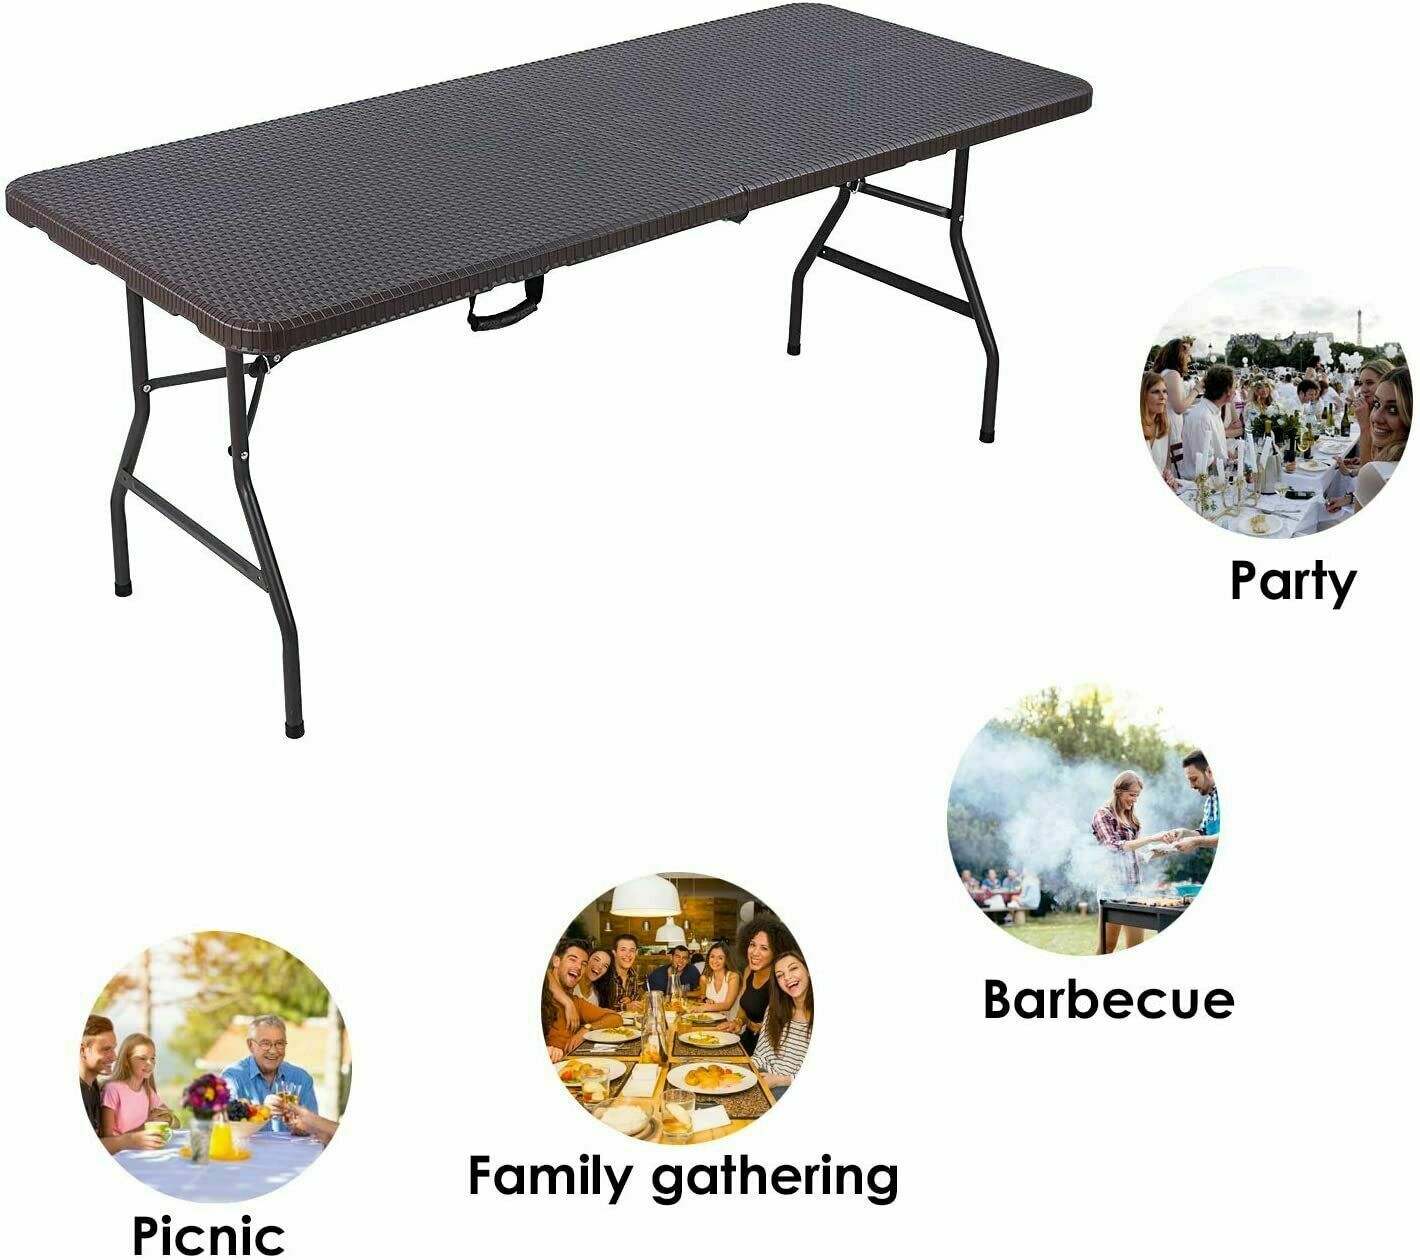 Rattan Effect Foldable Outdoor Bench And Table Portable Outdoor Garden Furniture